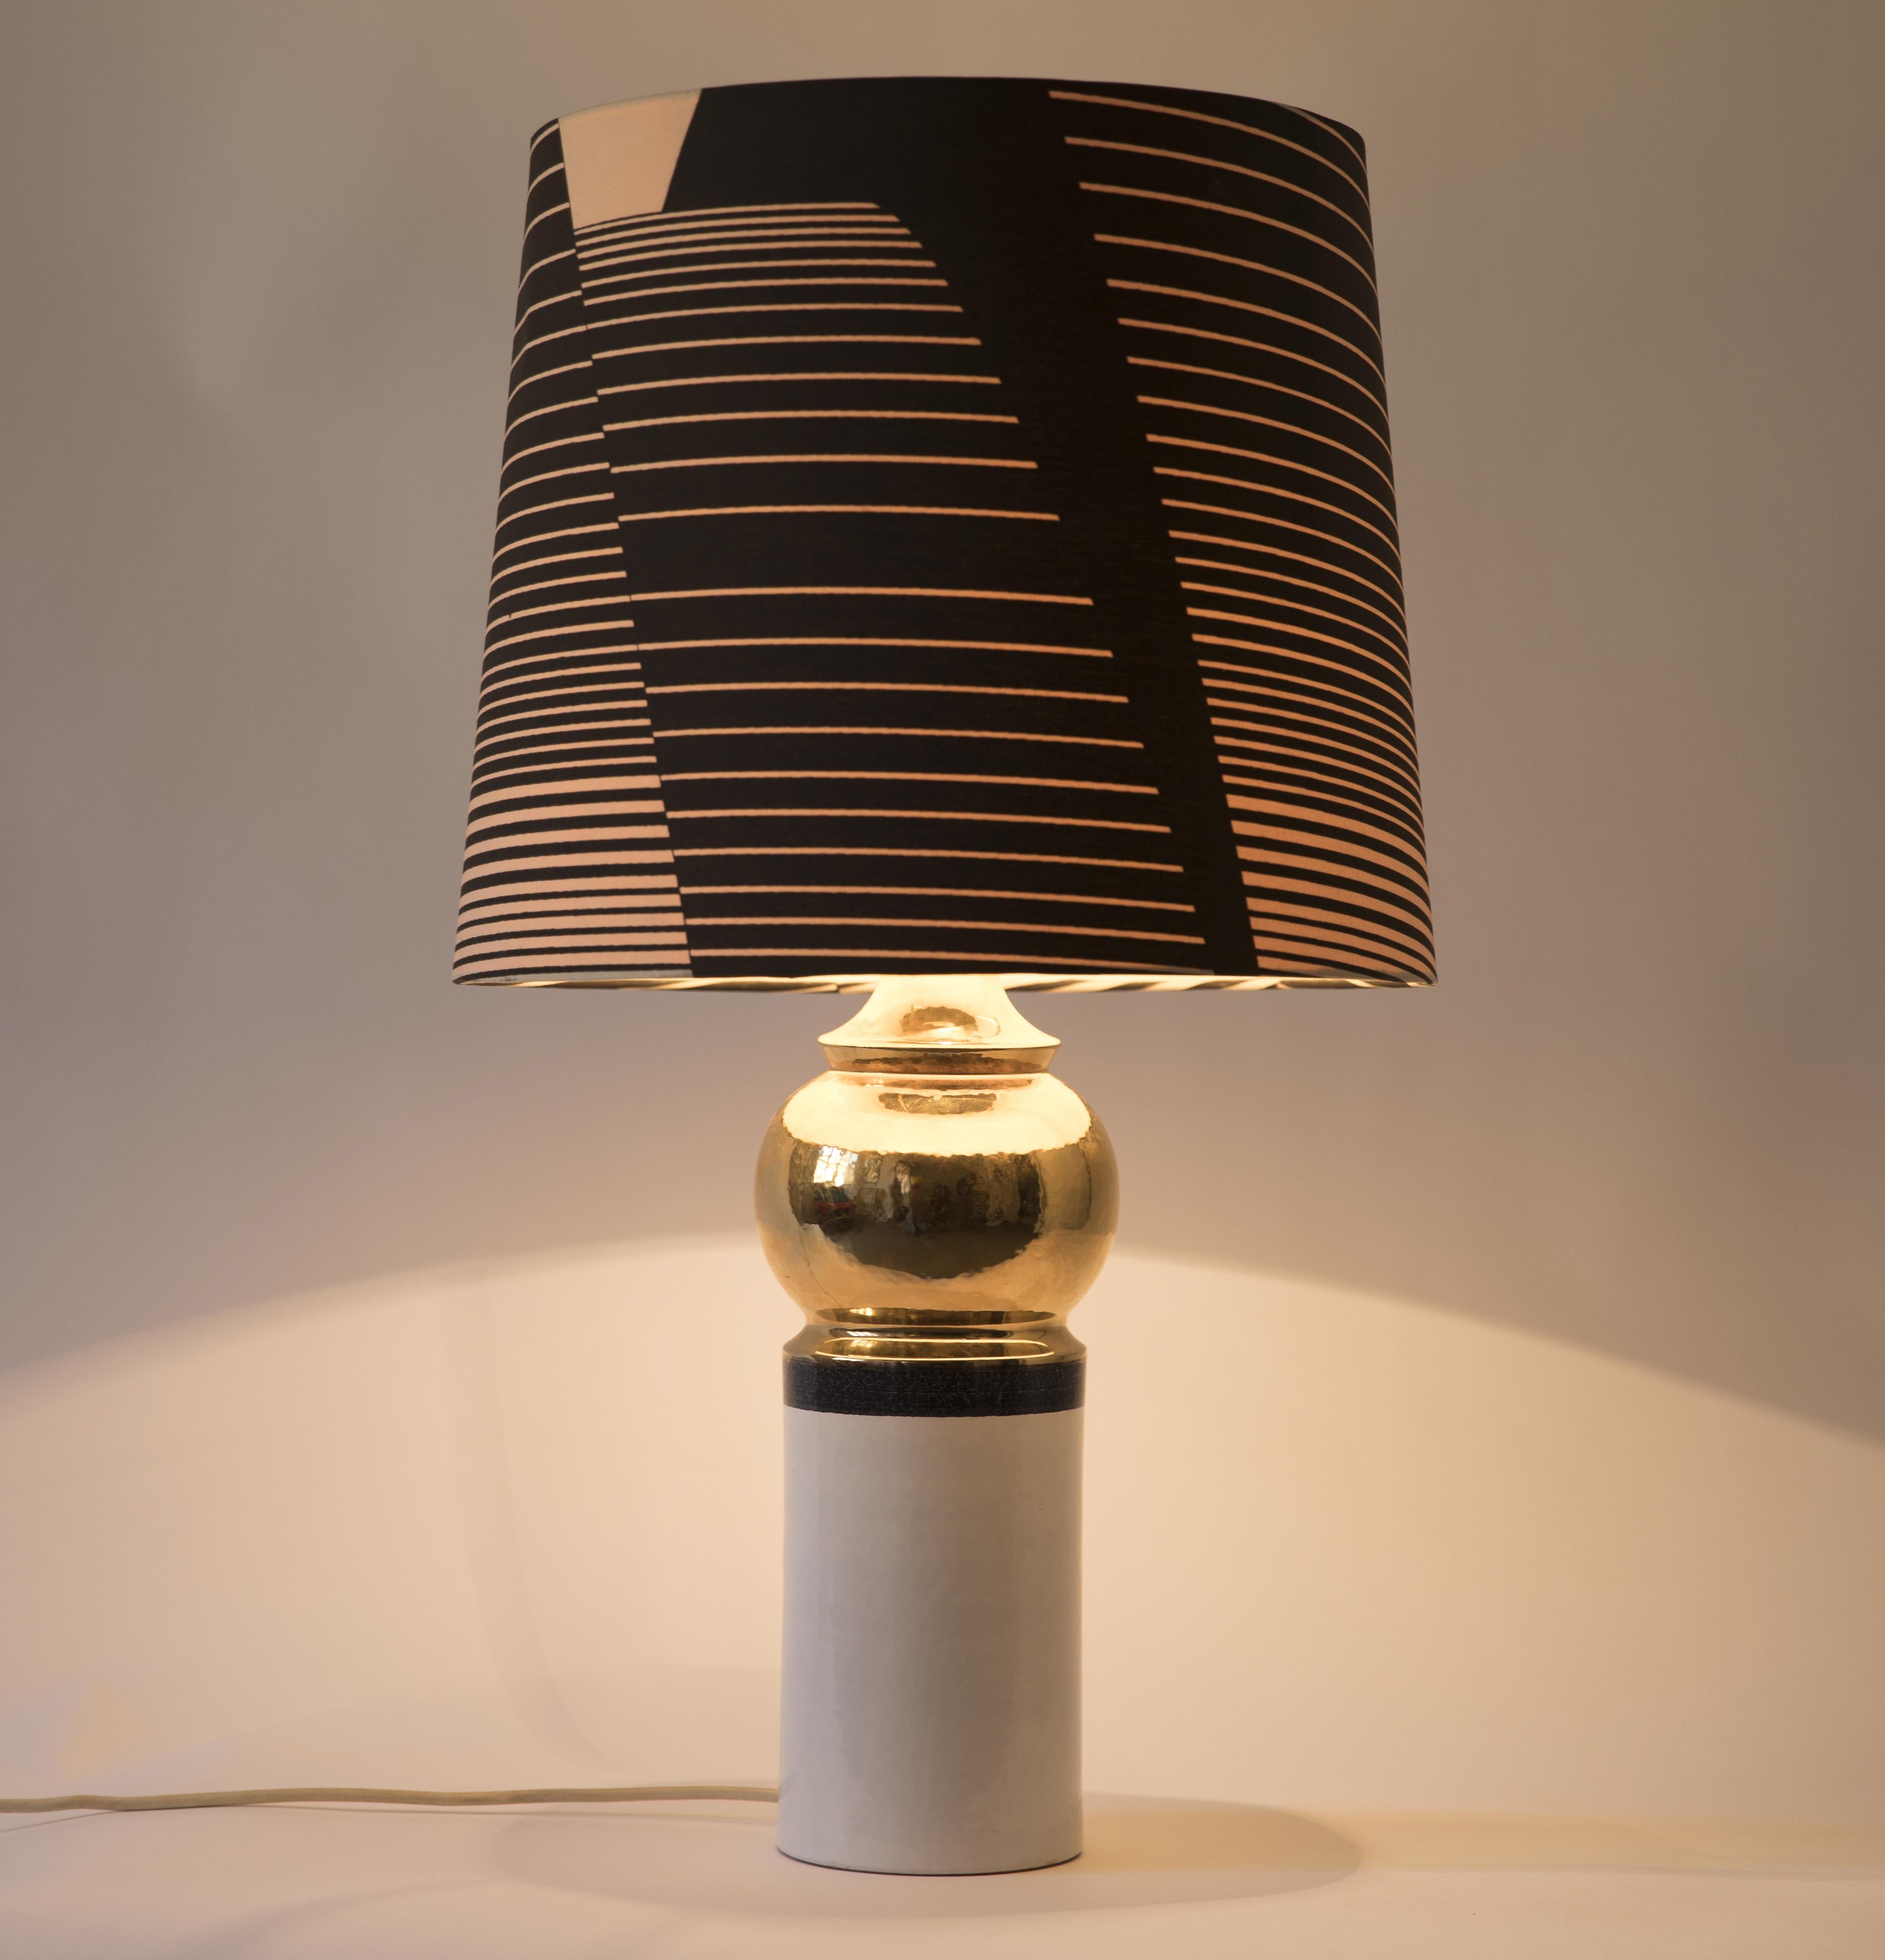 Elegant glazed ceramic table lamp with cylinder shaped base and original shade. In excellent shape and with functional wiring.

Measures: Height 74 cm
Shade diameter 40 cm
Shade height 37 cm
Base diameter 14 cm.